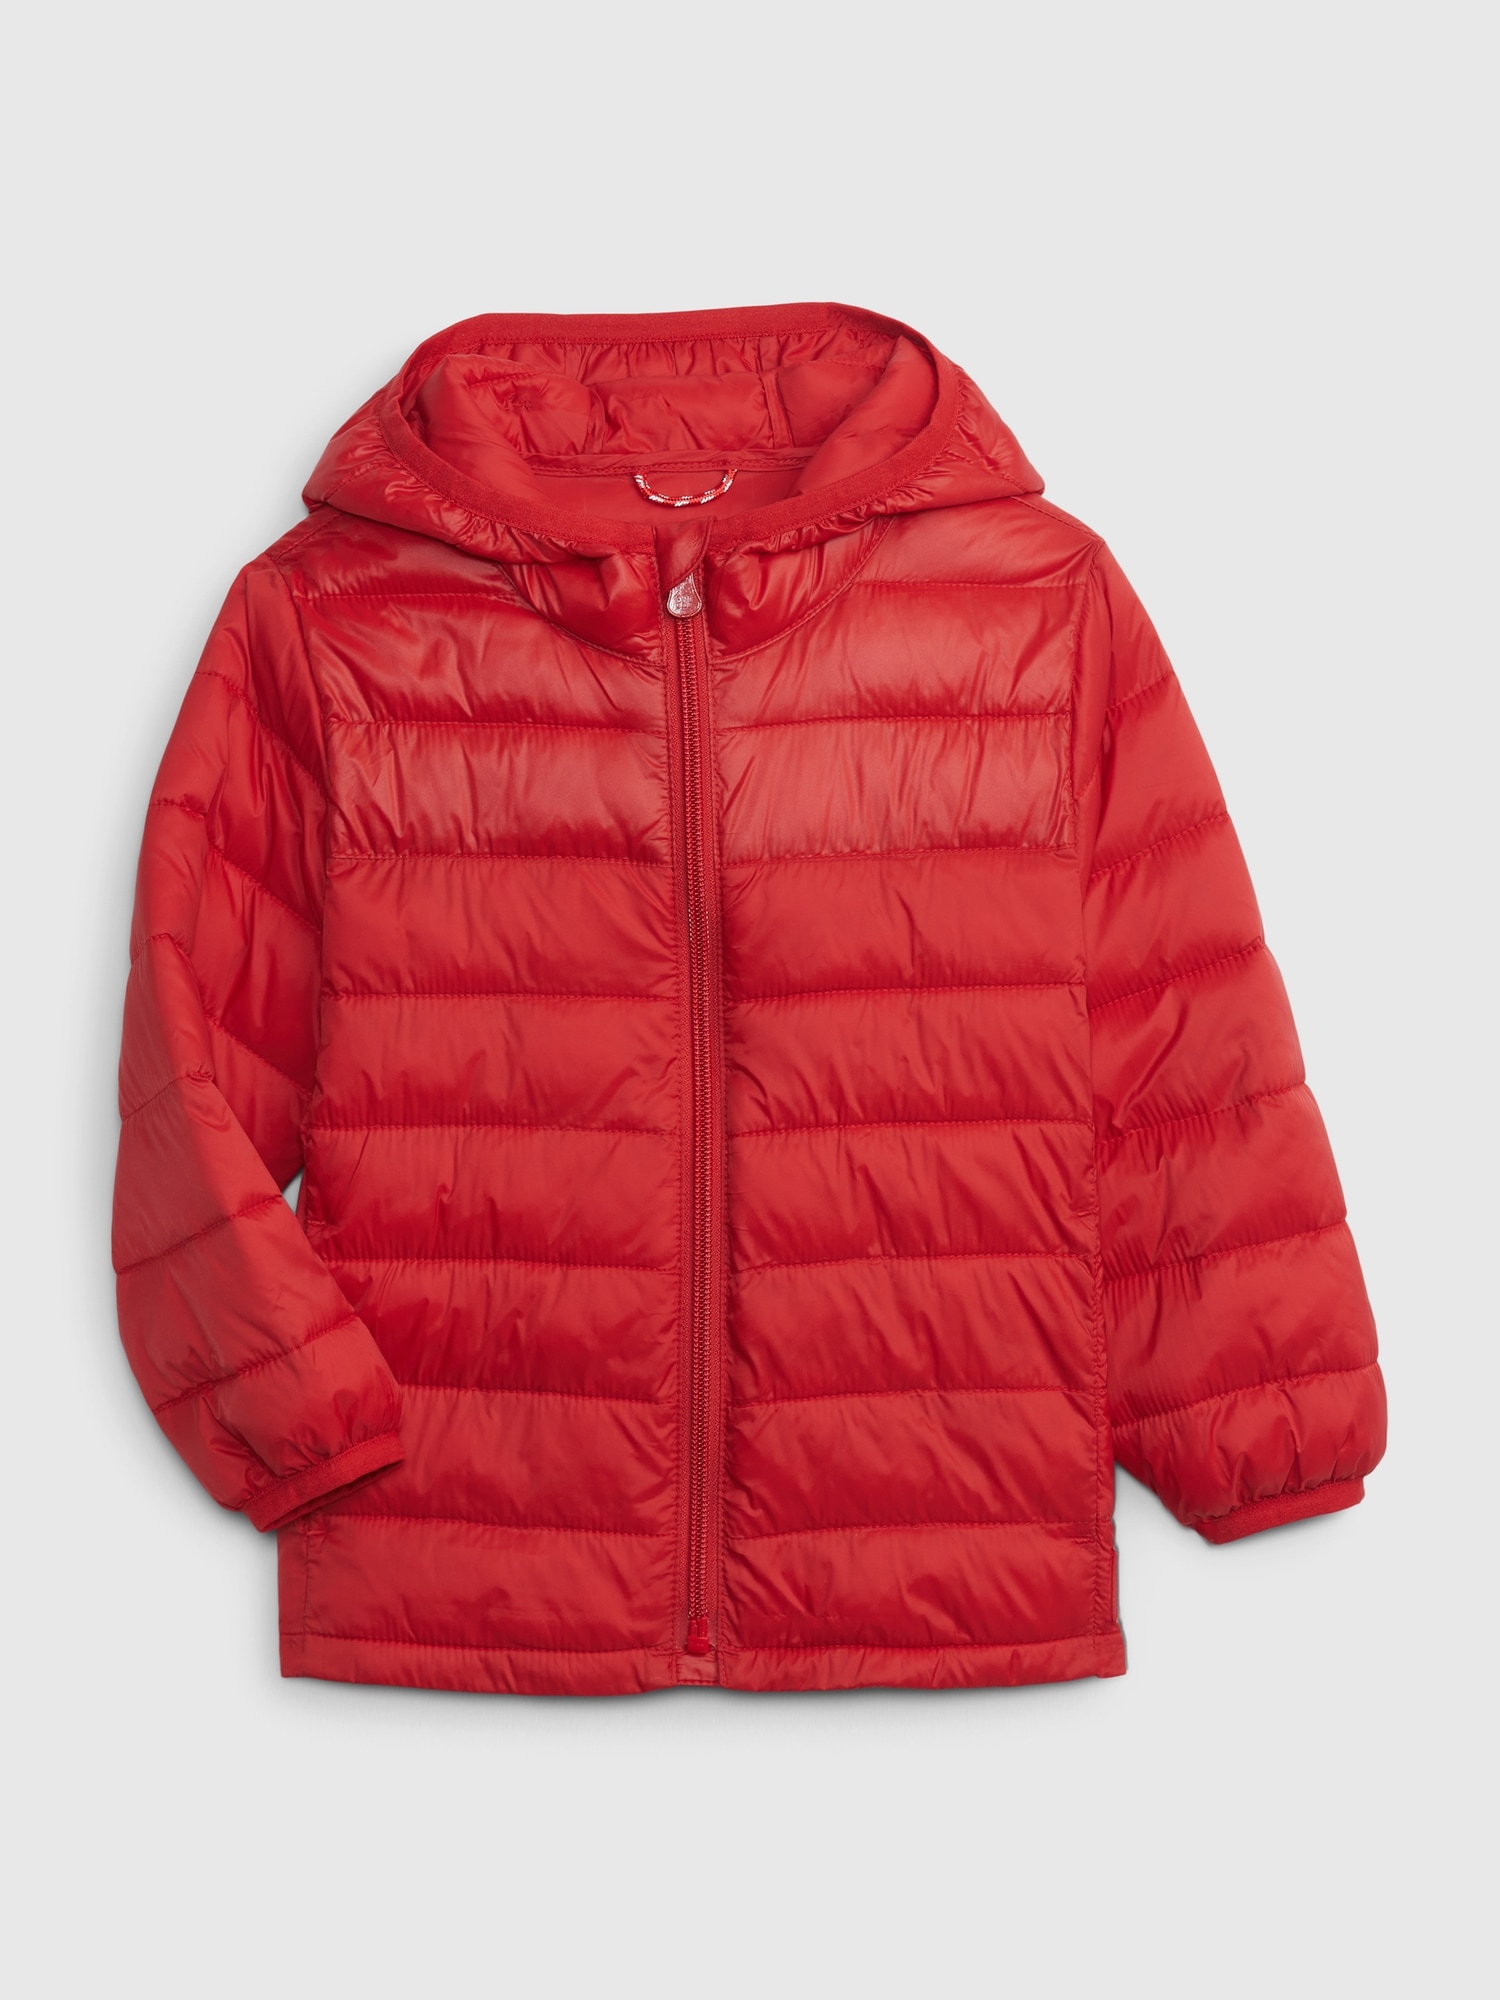 Gap Babies' Toddler 100% Recycled Lightweight Puffer Jacket In Modern Red